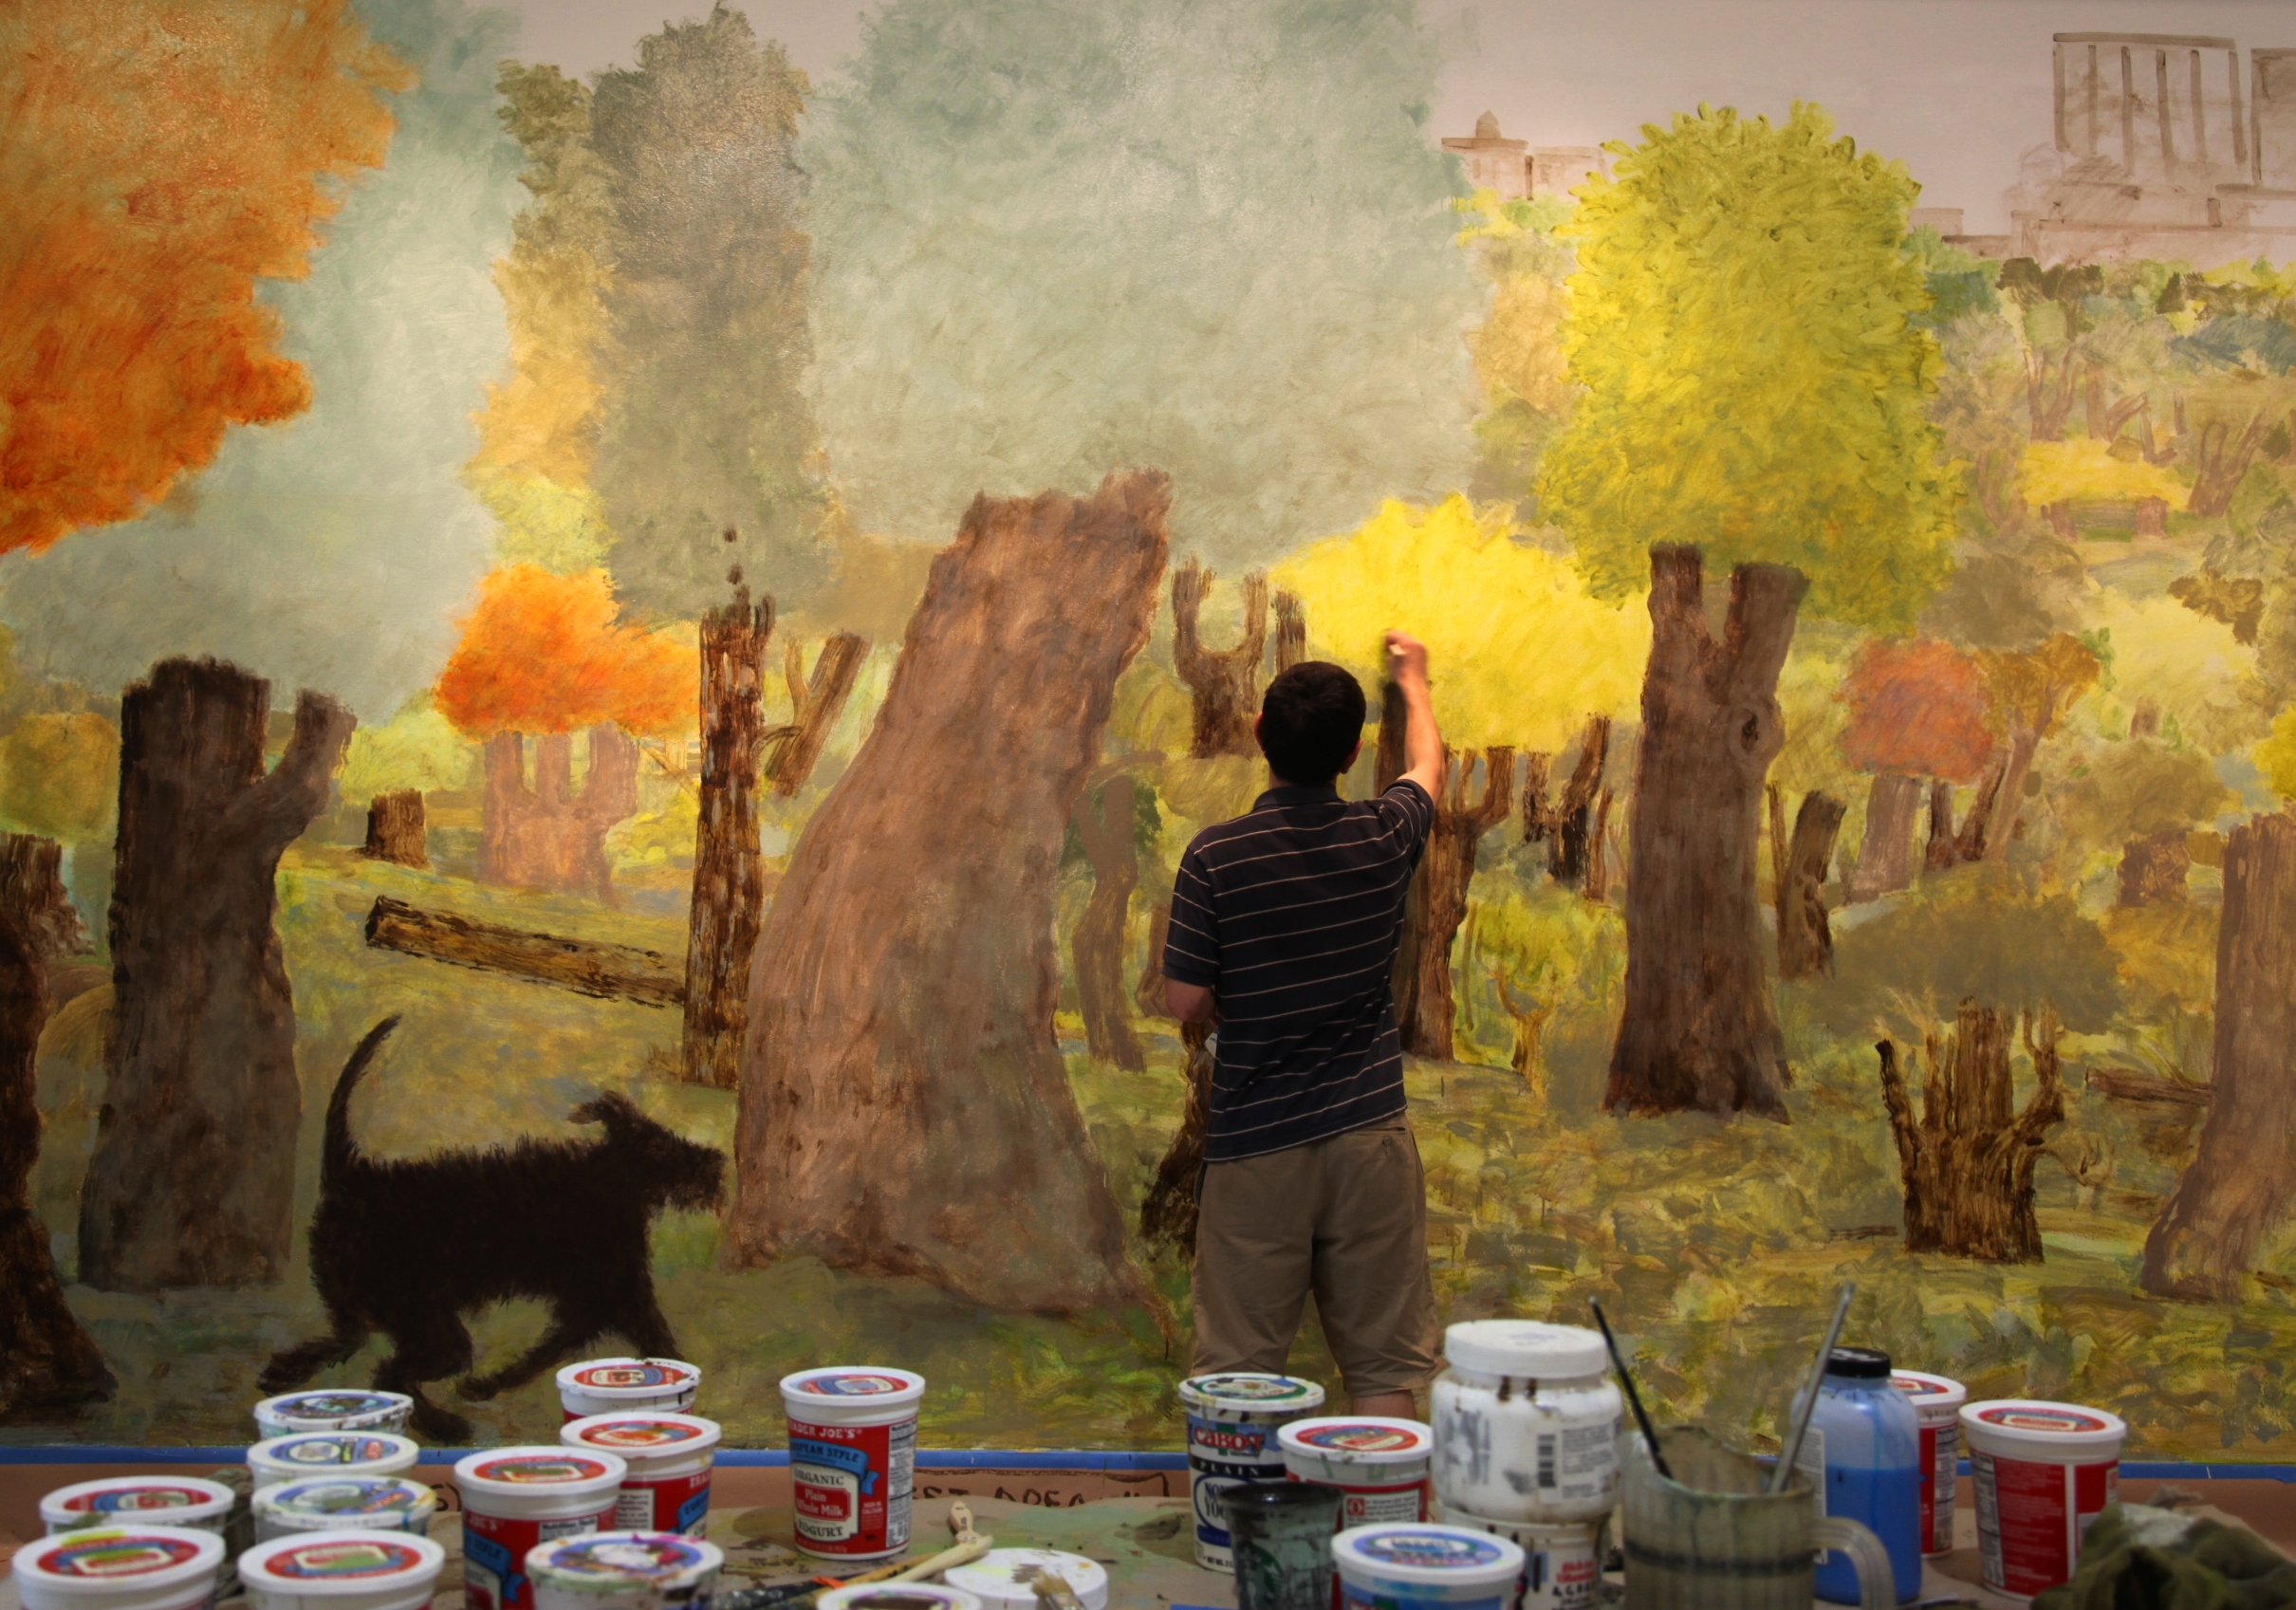 In the foreground is a table surface with recycled, yogurt containers filled with paint, paint brushes, and a pitcher of water. In the background, the artist David Kearns, has his back turned and is painting a mural made up of trees transitioning into fall colors. The mural features a black-haired dog walking amongst the trees and a city scape in the background. The paint style is blotchy and fuzzy with details not completely made out.